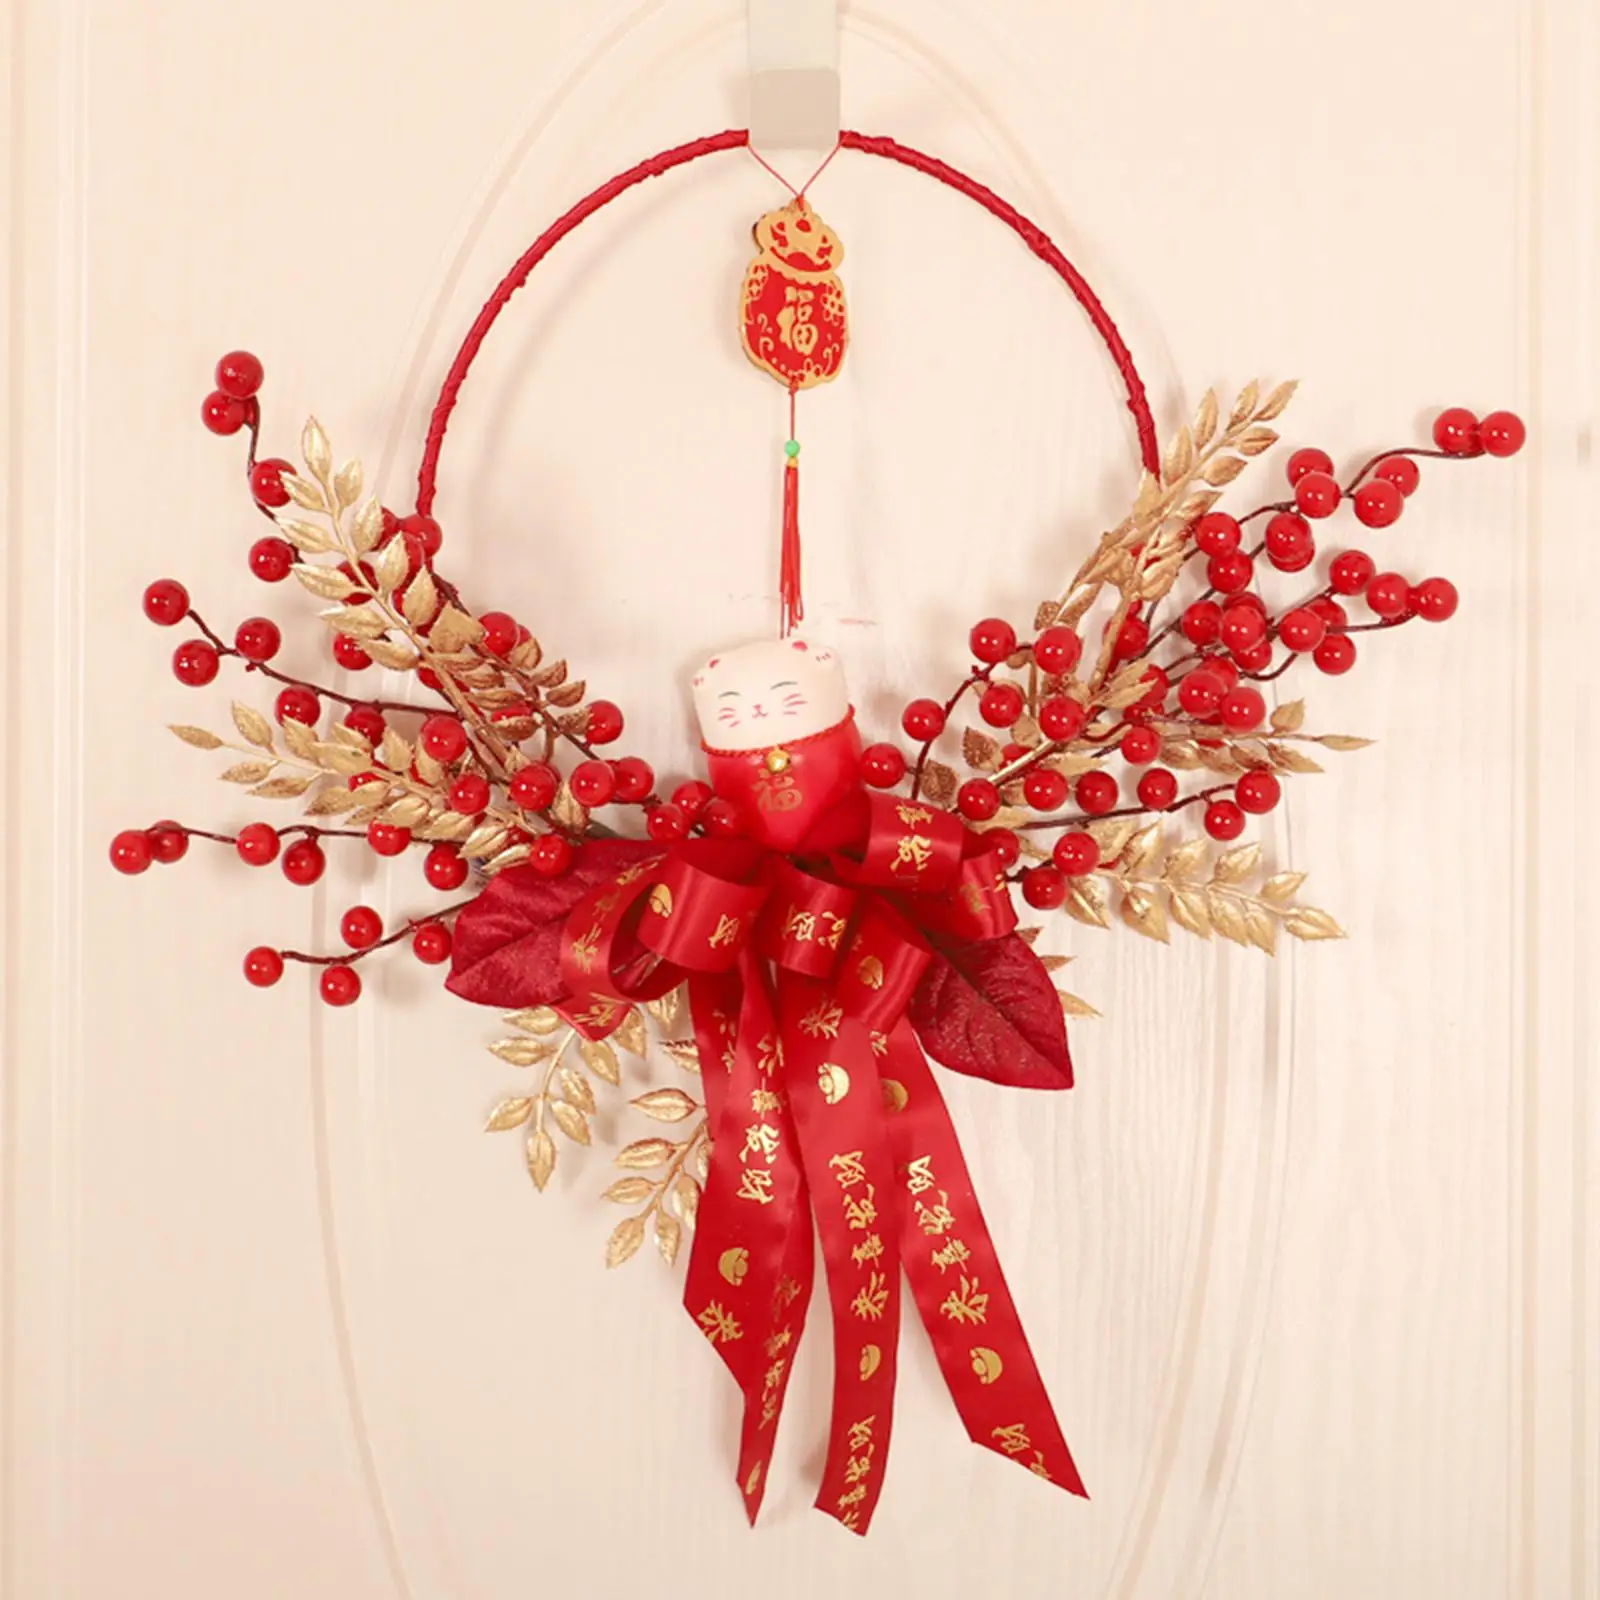 Traditional Chinese New Year Decoration Round Wreath for Decor